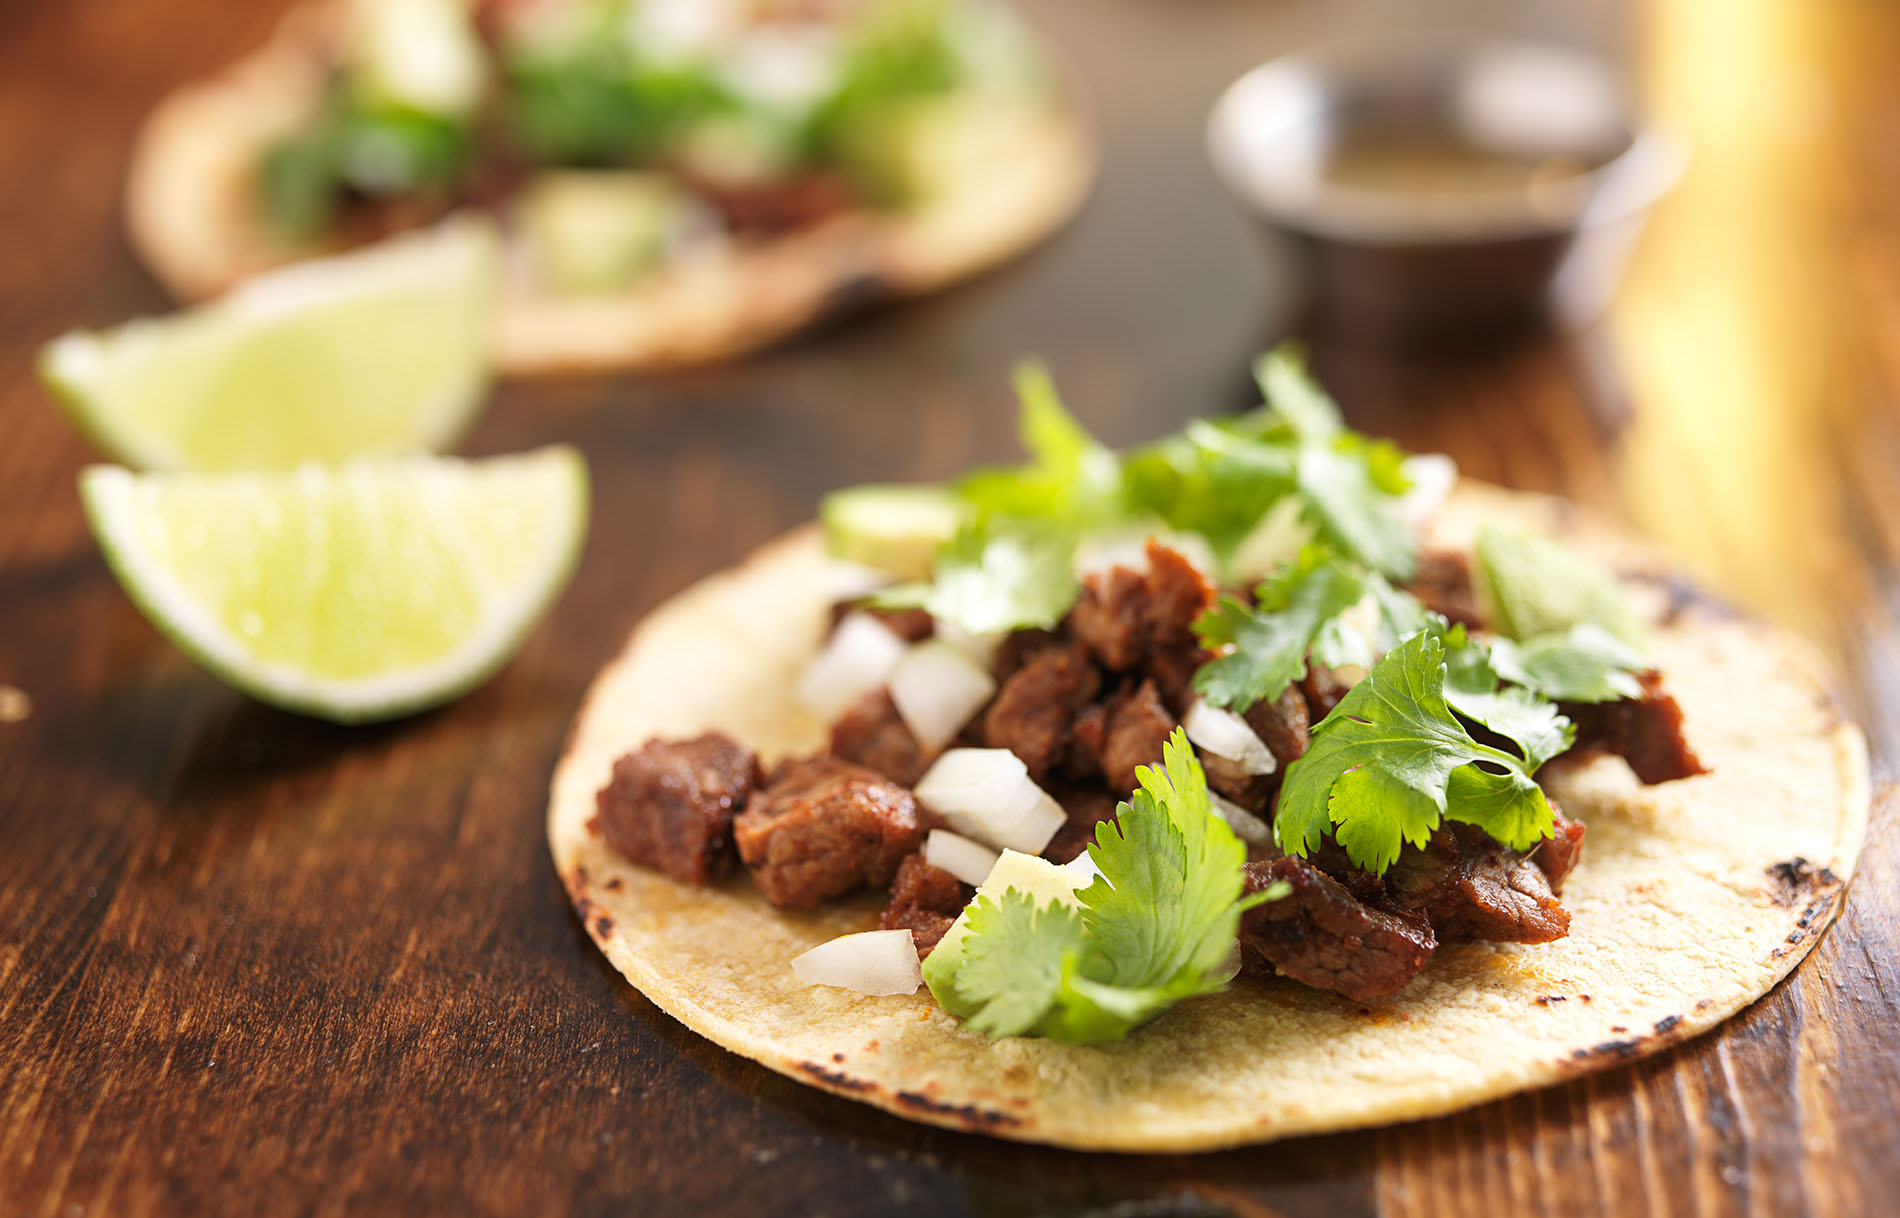 The Immense Popularity of the Taco in America